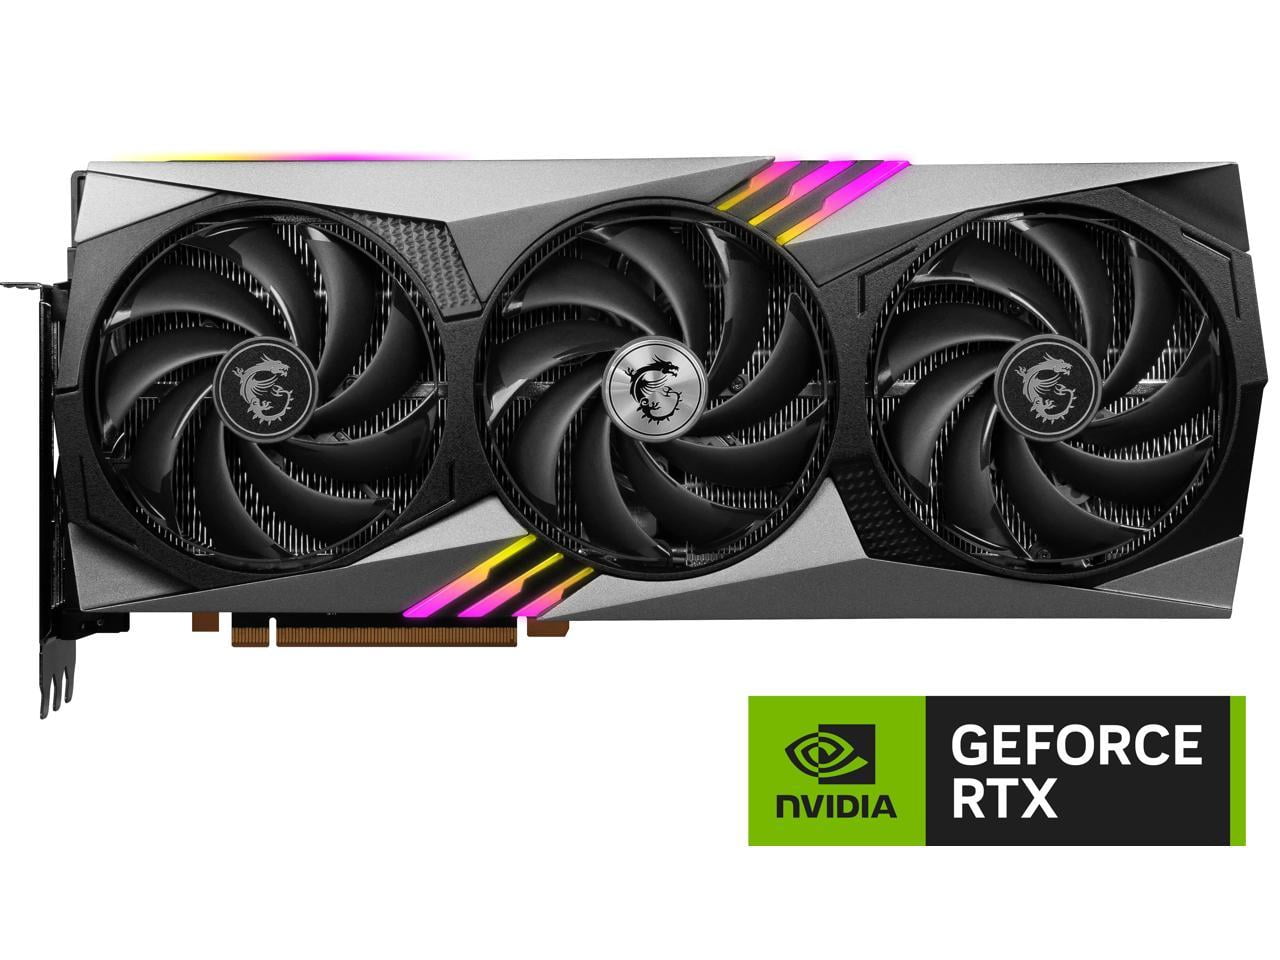 Mindful Bestået Statistikker MSI GeForce RTX 4080 16GB GAMING X TRIO Graphics Card - DirectX 12 Ultimate  Supported - G-Sync Compatible - HDCP Supported - TORX Fan 5.0 Cooling  System - 16 GB GDDR6X Memory - Walmart.com